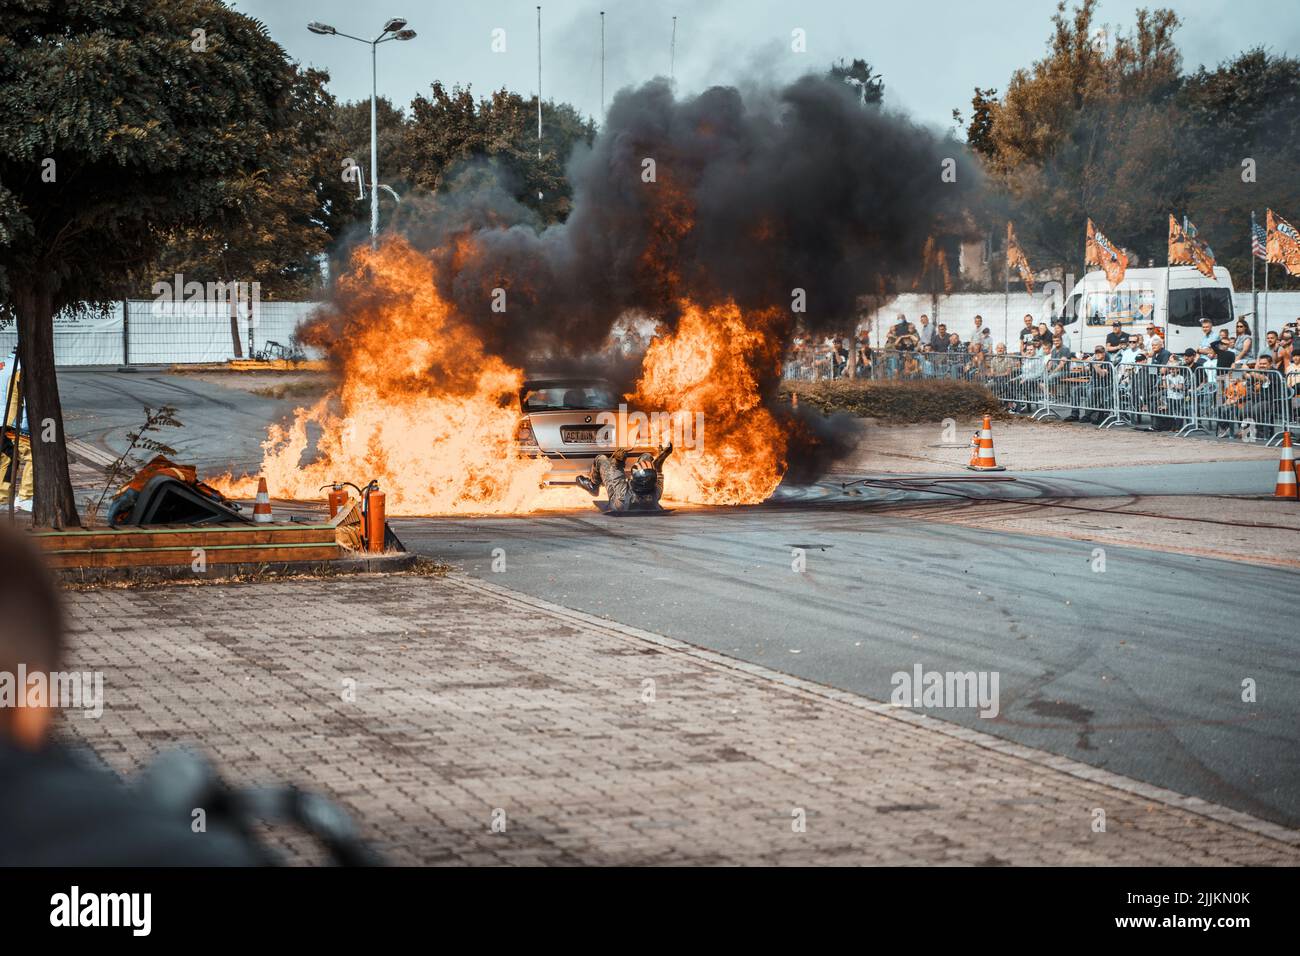 The car on fire at Lagrin's Action Sport Team show. Lohne, Germany. Stock Photo